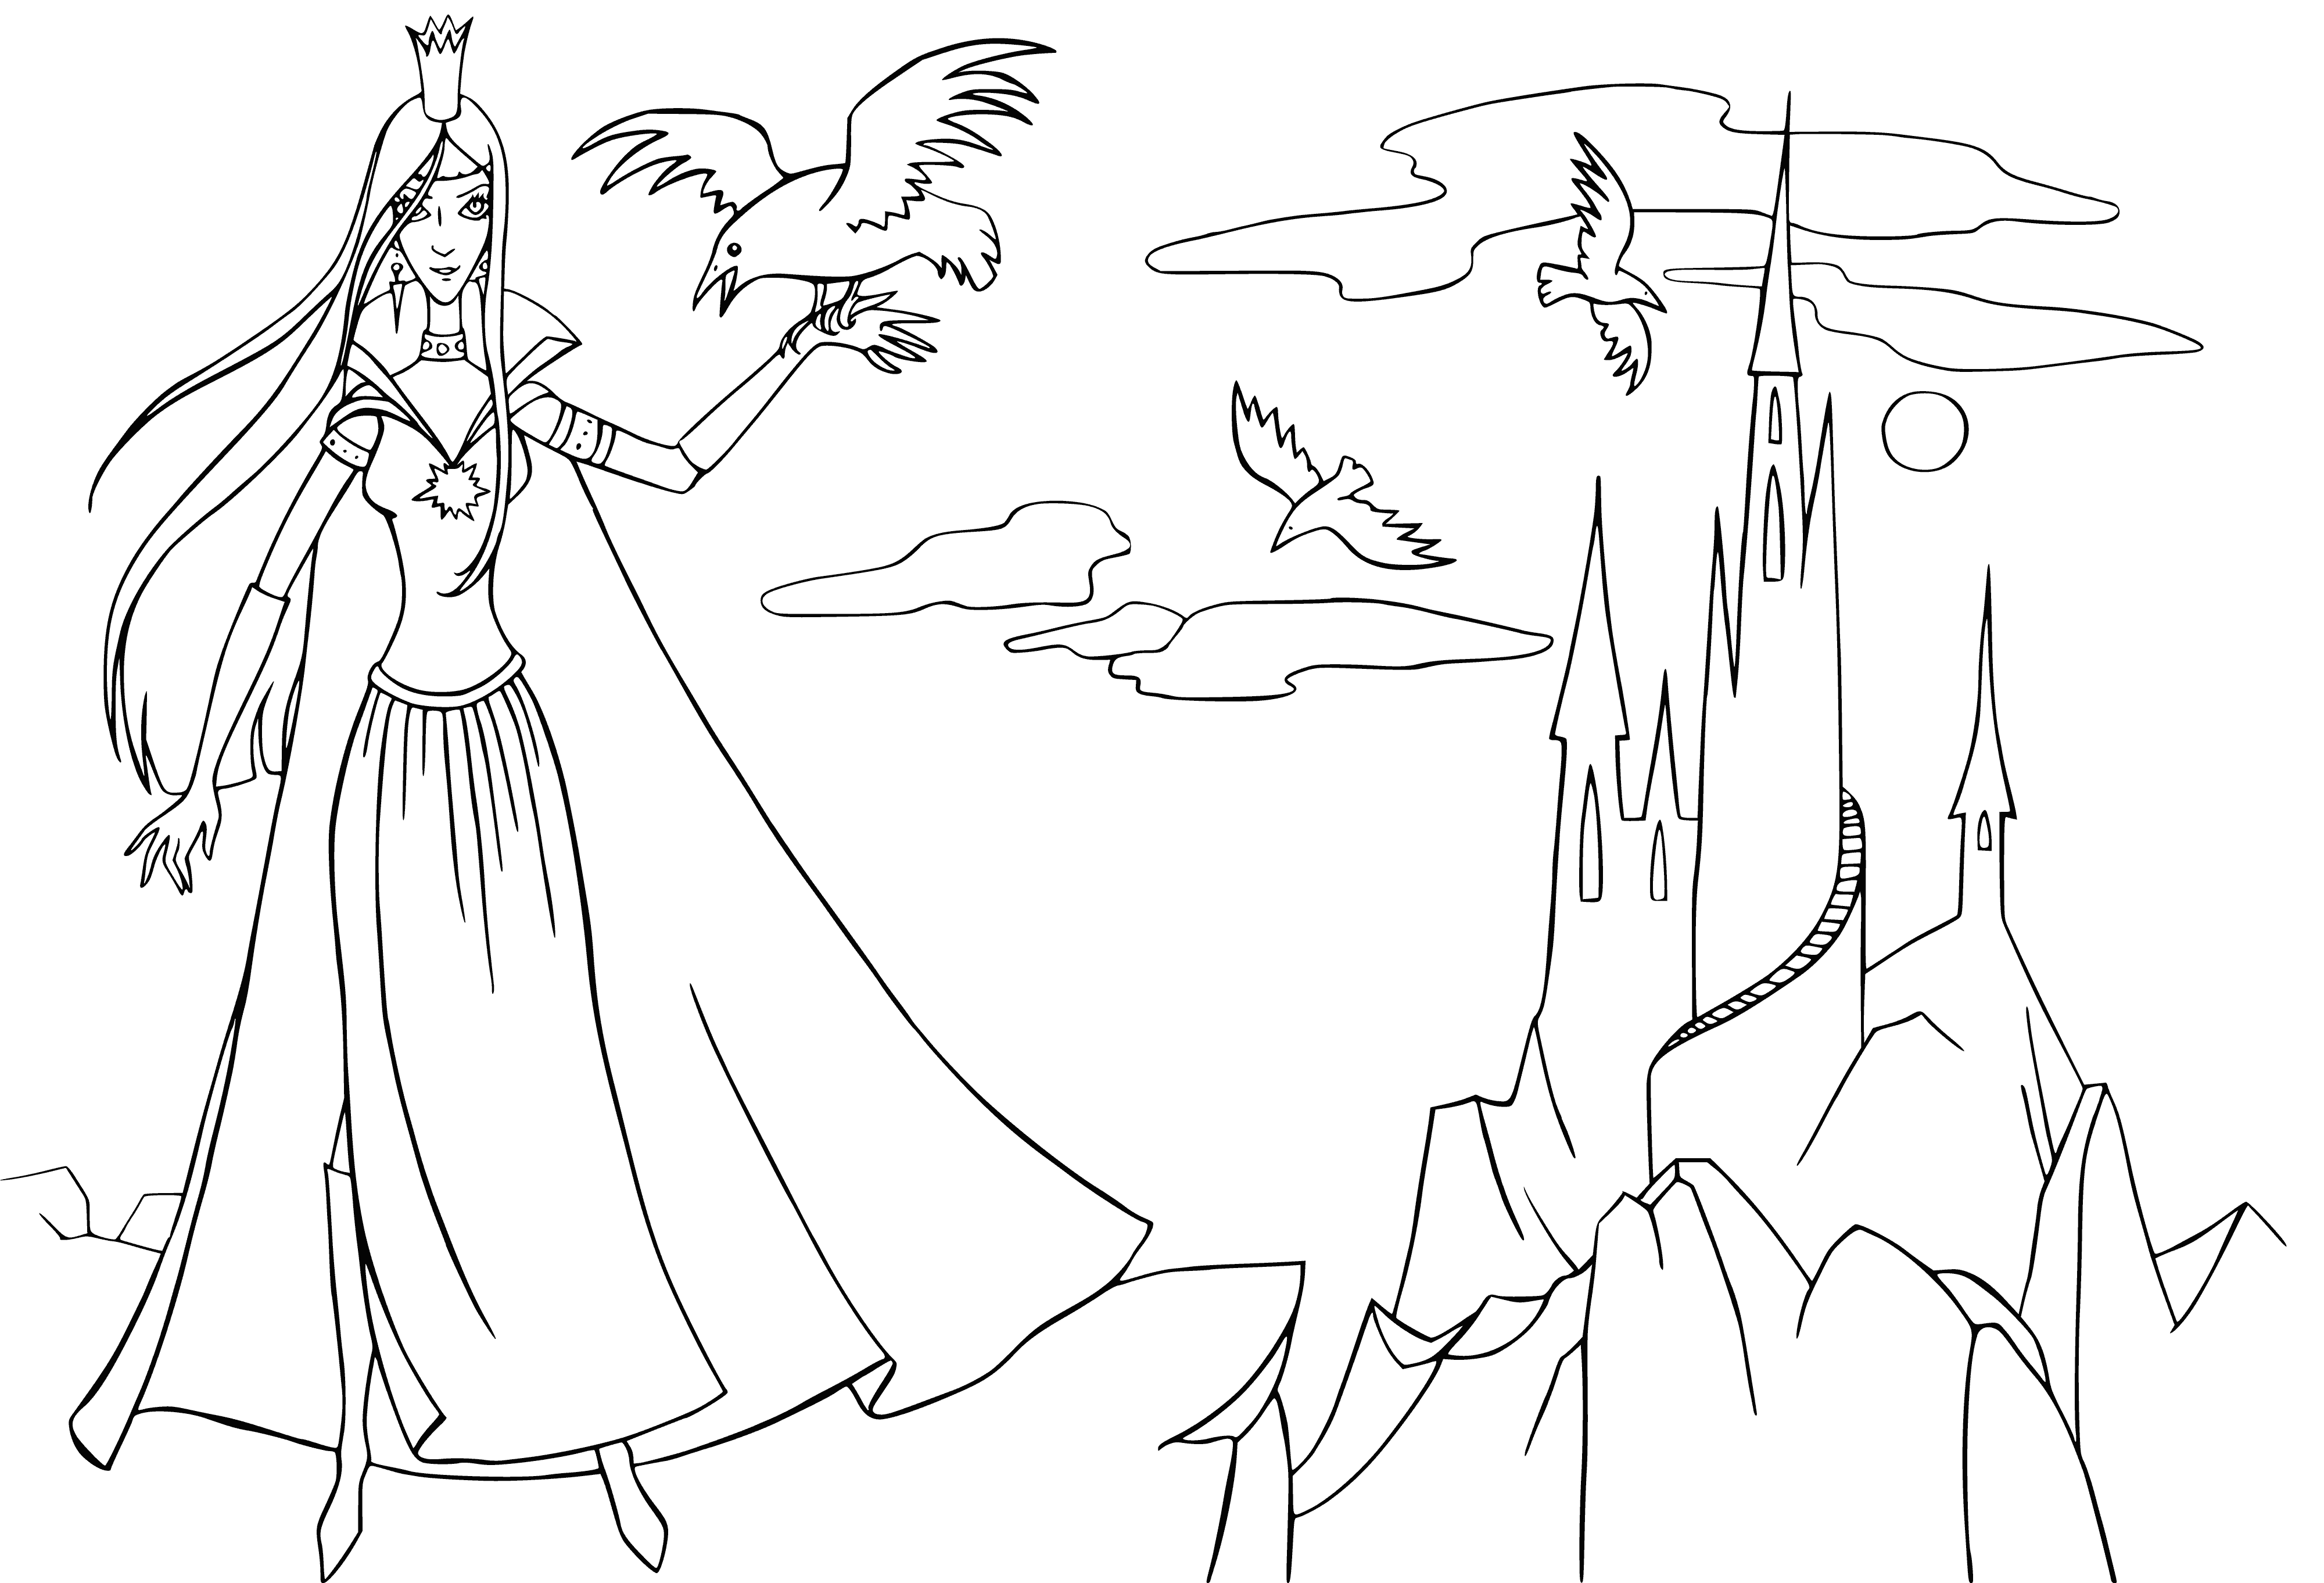 coloring page: The Fairy Queen sits on her throne, surrounded by her subjects. Regal, serene, and crowned, she reigns over the beautiful fairy kingdom.